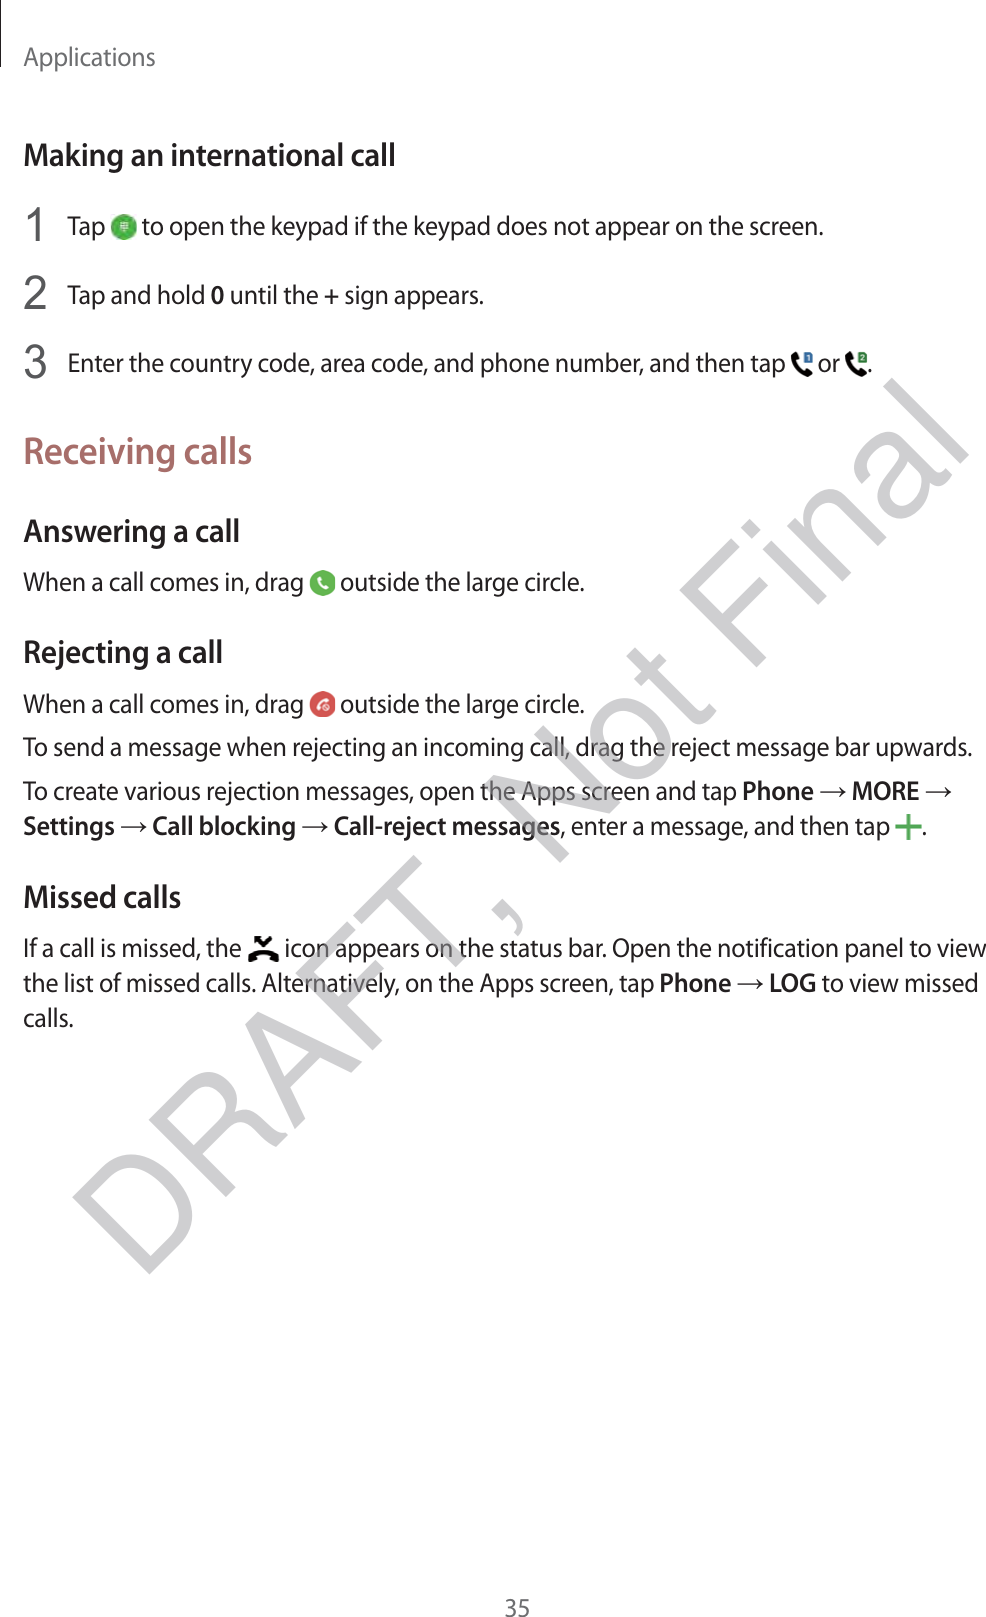 Applications35Making an international call1 Tap   to open the keypad if the keypad does not appear on the screen.2 Tap and hold 0 until the + sign appears.3 Enter the country code, area code, and phone number, and then tap   or  .Receiving callsAnswering a callWhen a call comes in, drag   outside the large circle.Rejecting a callWhen a call comes in, drag   outside the large circle.To send a message when rejecting an incoming call, drag the reject message bar upwards.To create various rejection messages, open the Apps screen and tap Phone → MORE → Settings → Call blocking → Call-reject messages, enter a message, and then tap  .Missed callsIf a call is missed, the   icon appears on the status bar. Open the notification panel to view the list of missed calls. Alternatively, on the Apps screen, tap Phone → LOG to view missed calls.DRAFT, Not Final